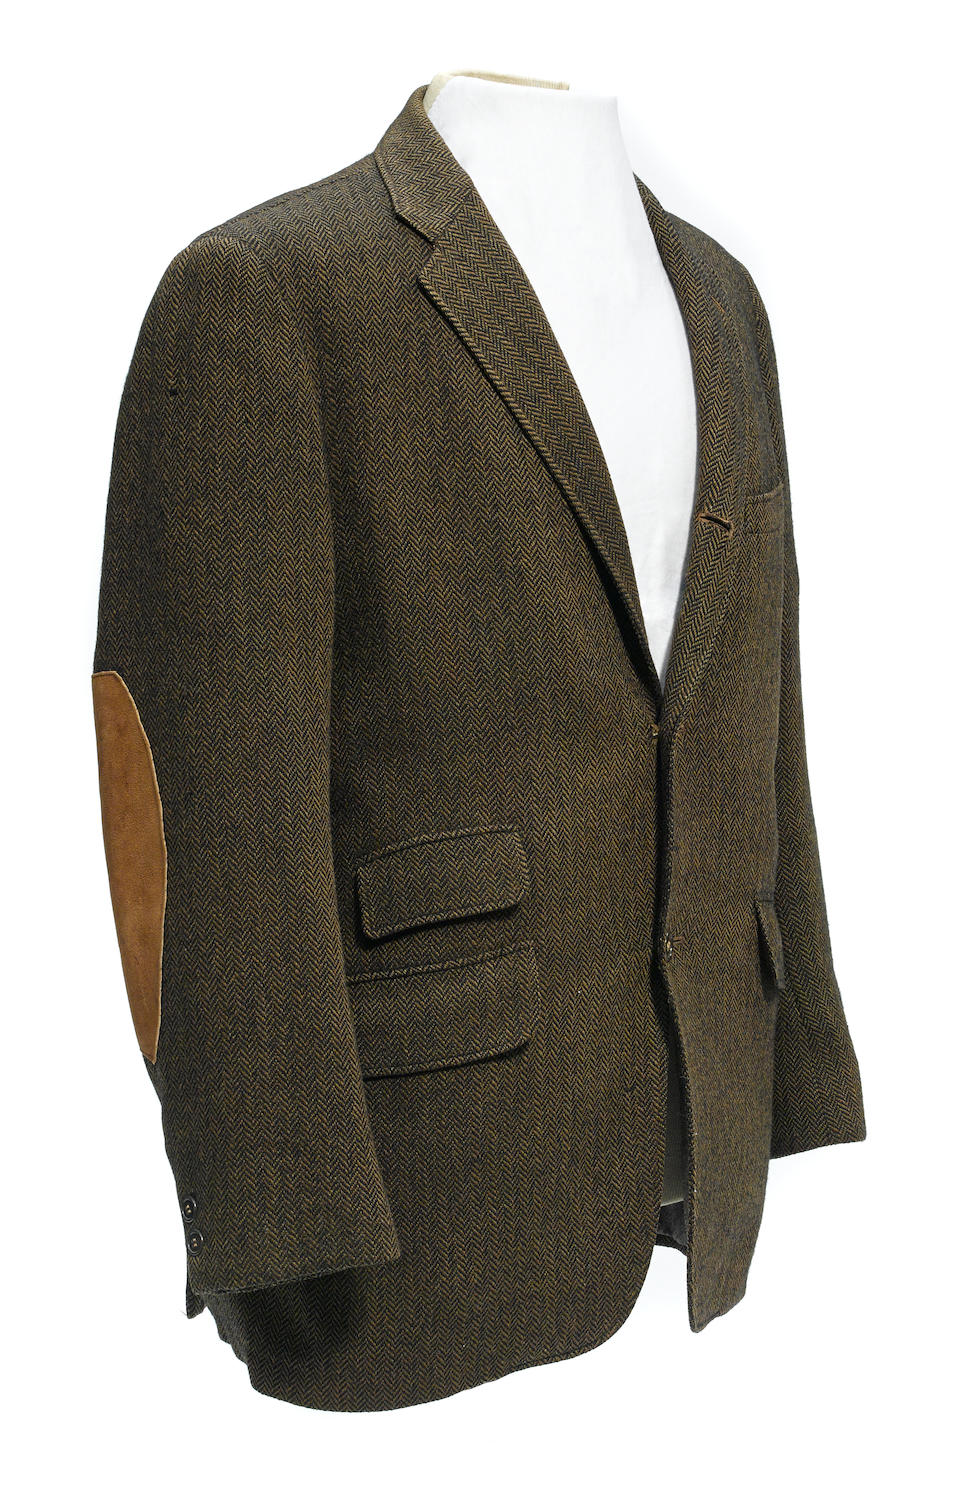 From The Chad McQueen Collection The Bullitt  Jacket